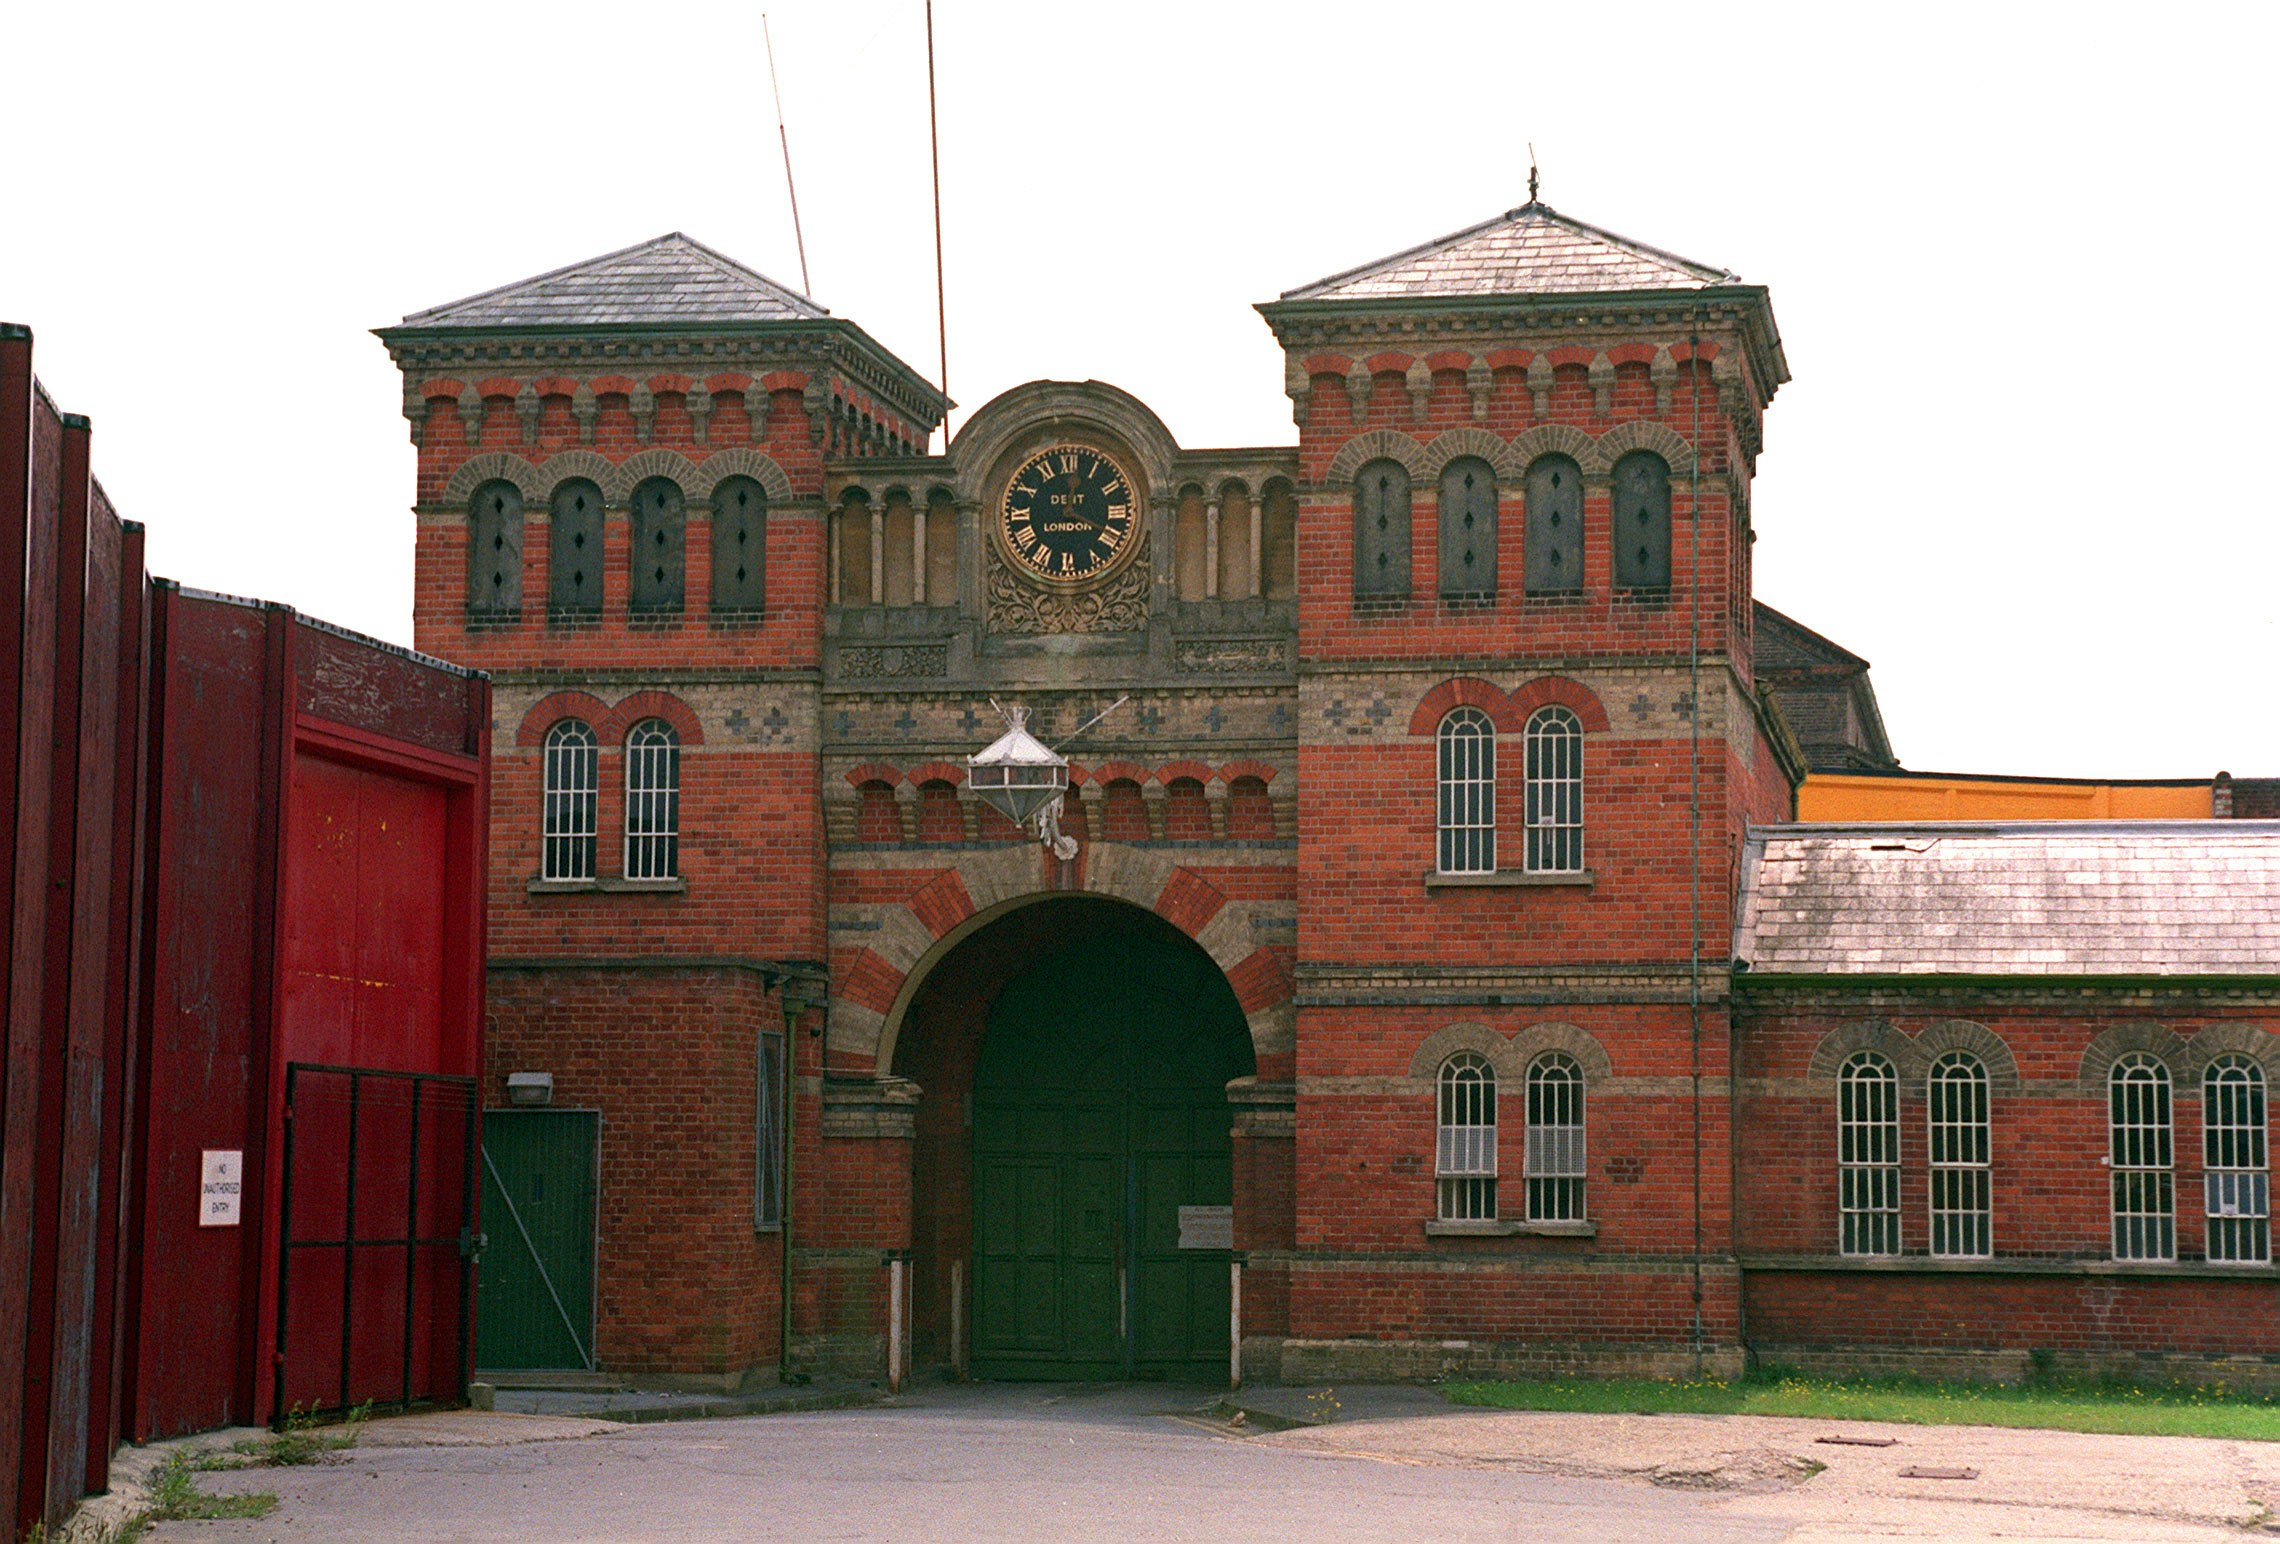 A photo of the entrance to the victorian building of Broadmoor Hospital